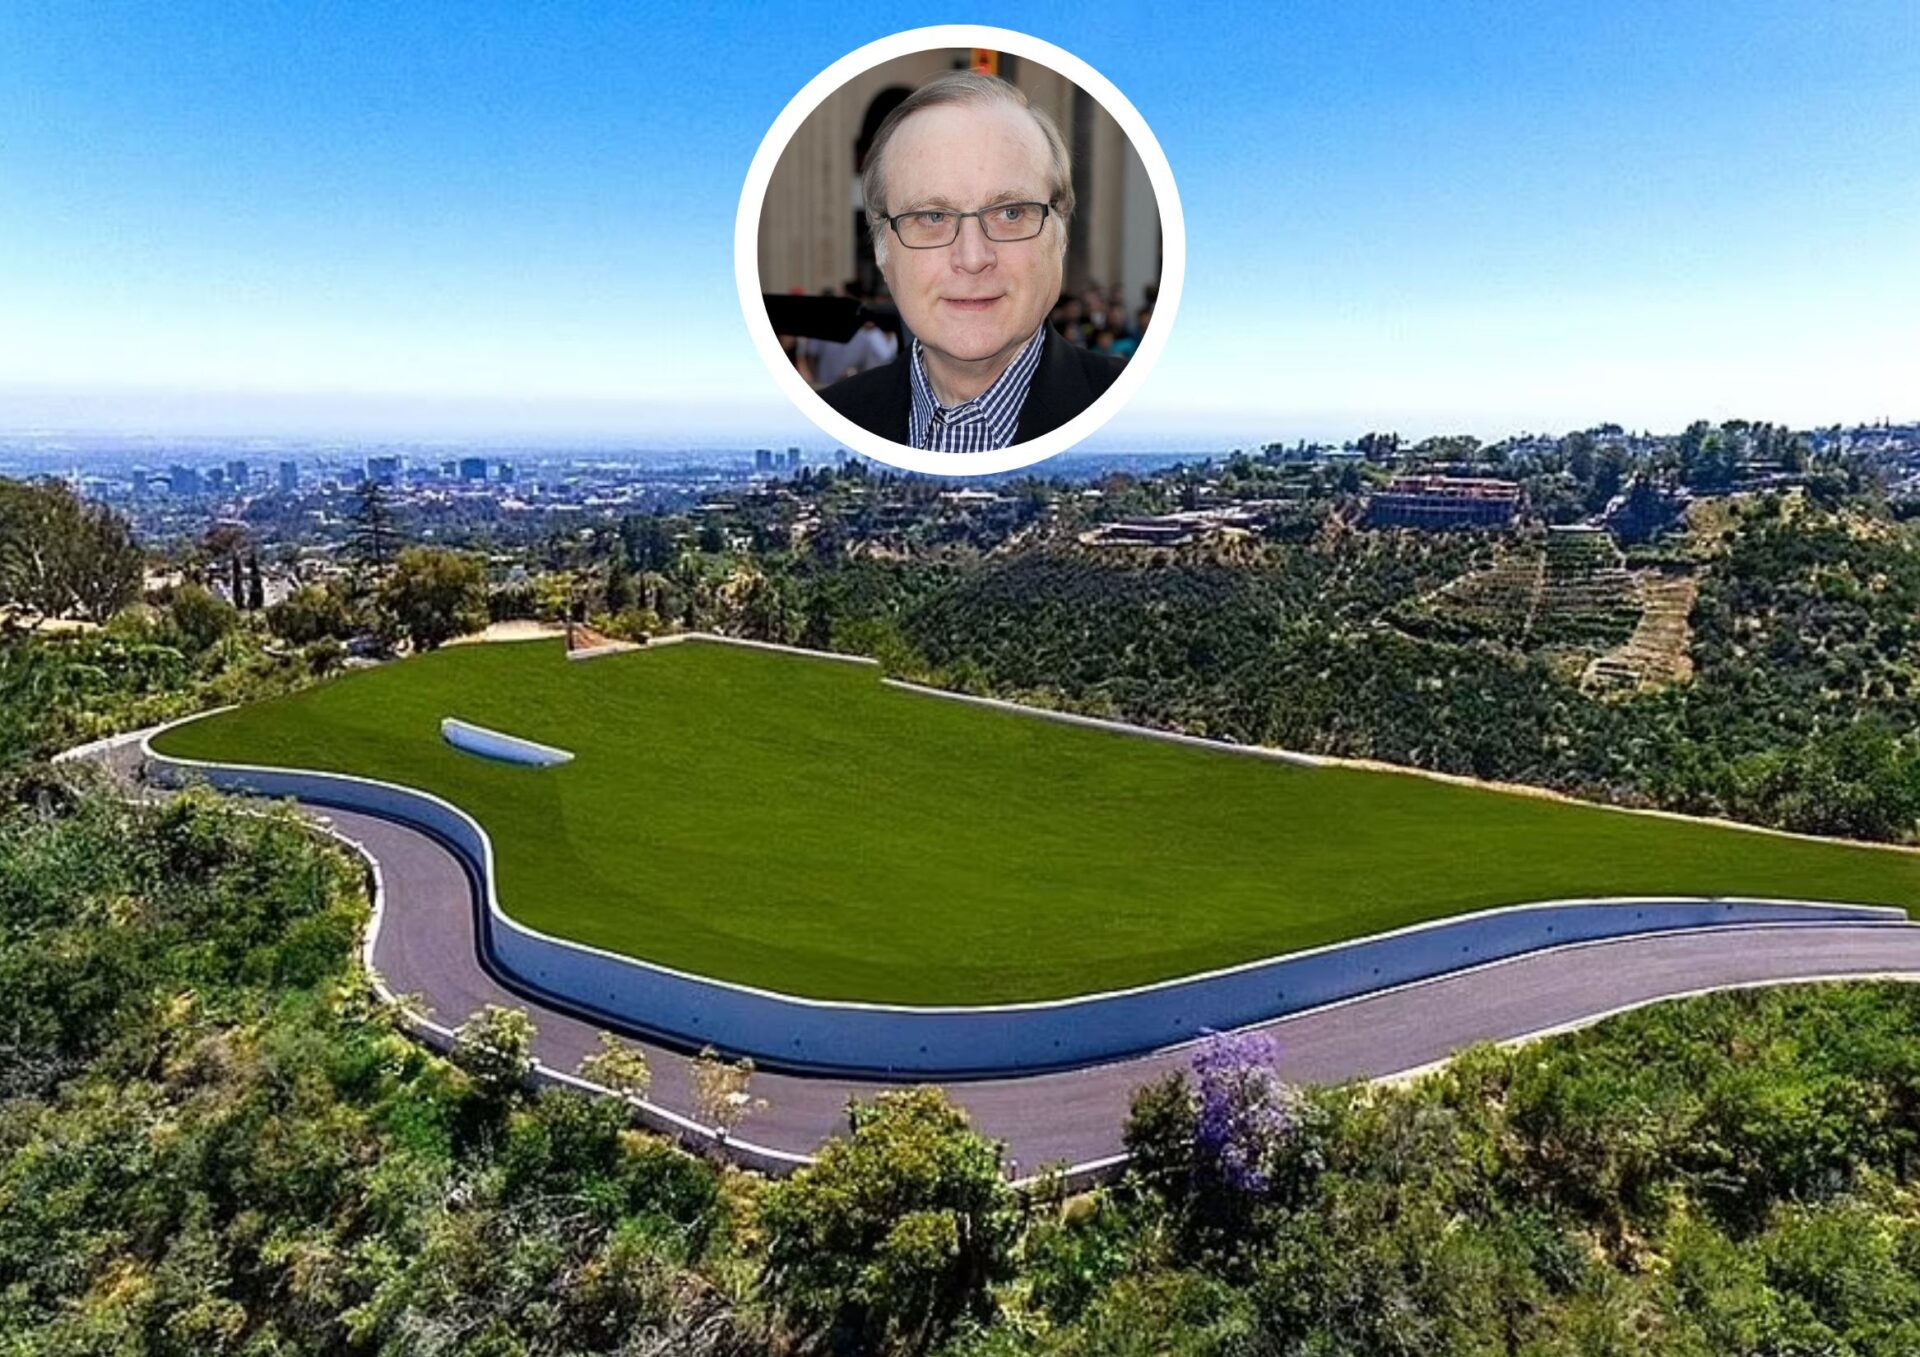 Main Image of Former Google CEO's Hill-Estate